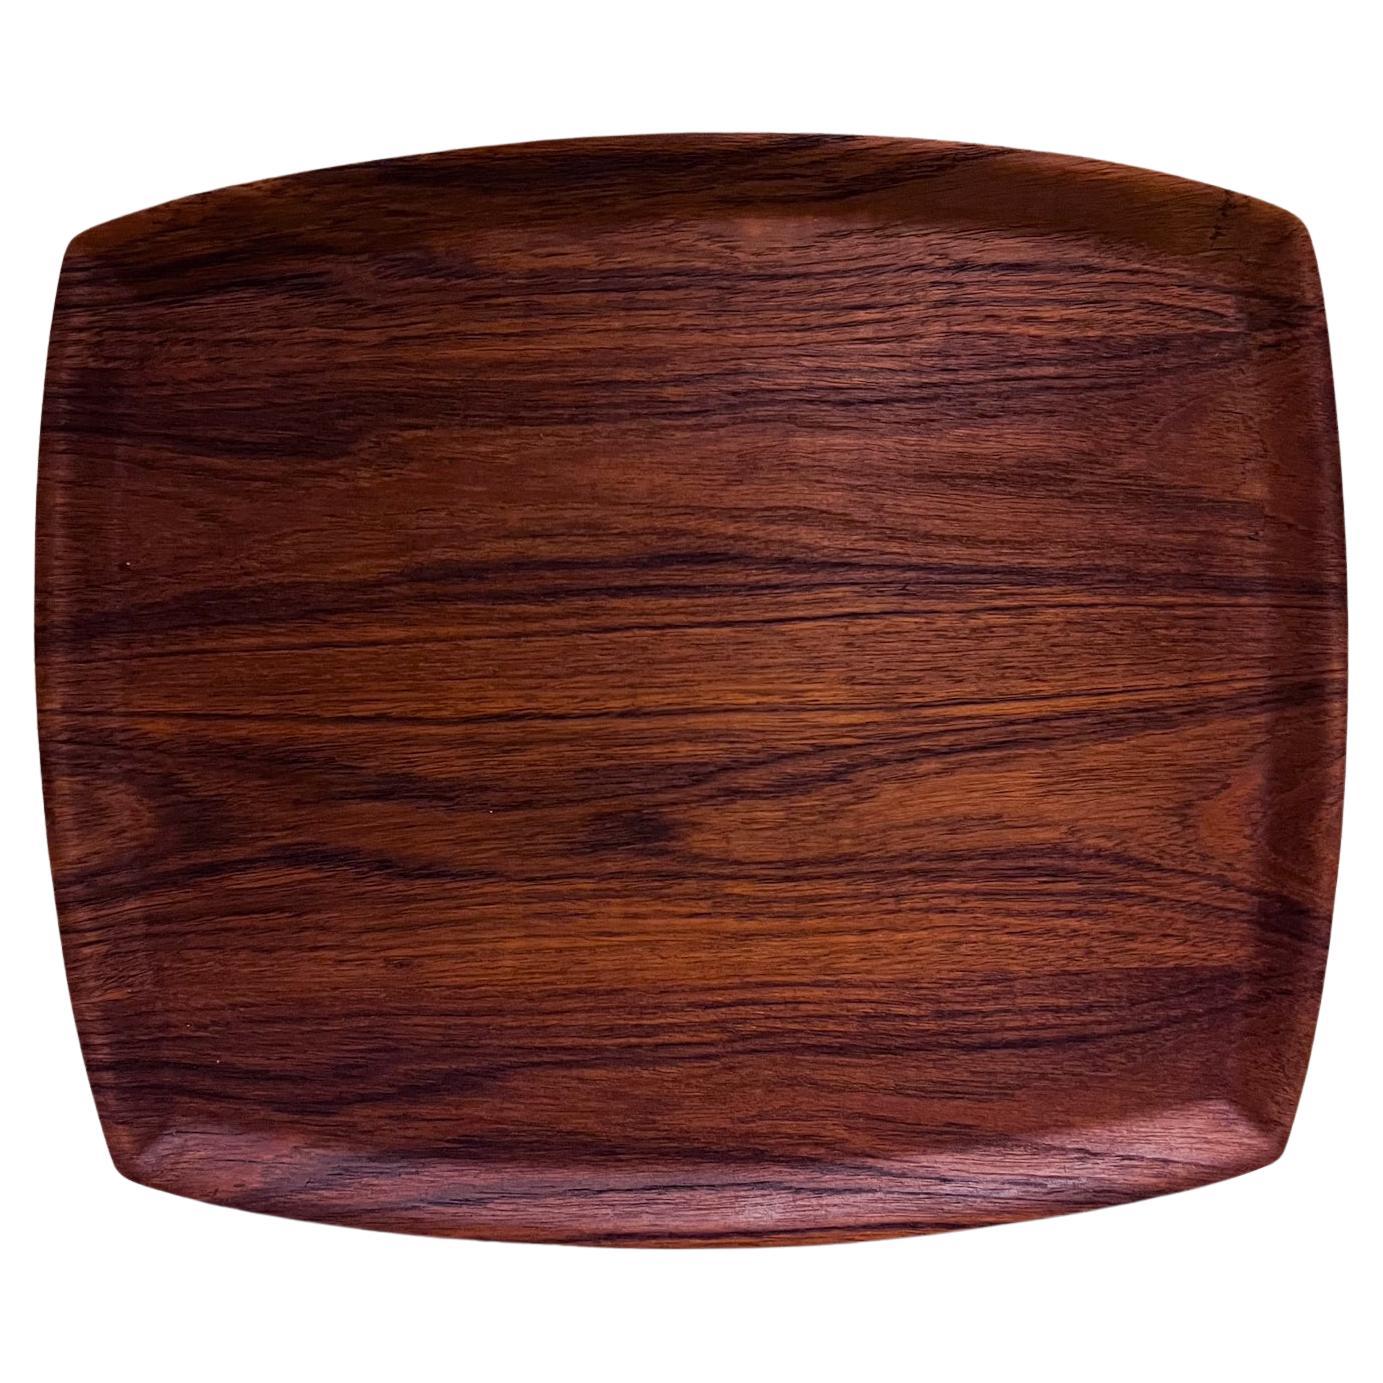 1960s Wood Teak Tray from Sweden Style Jens Quistgaard